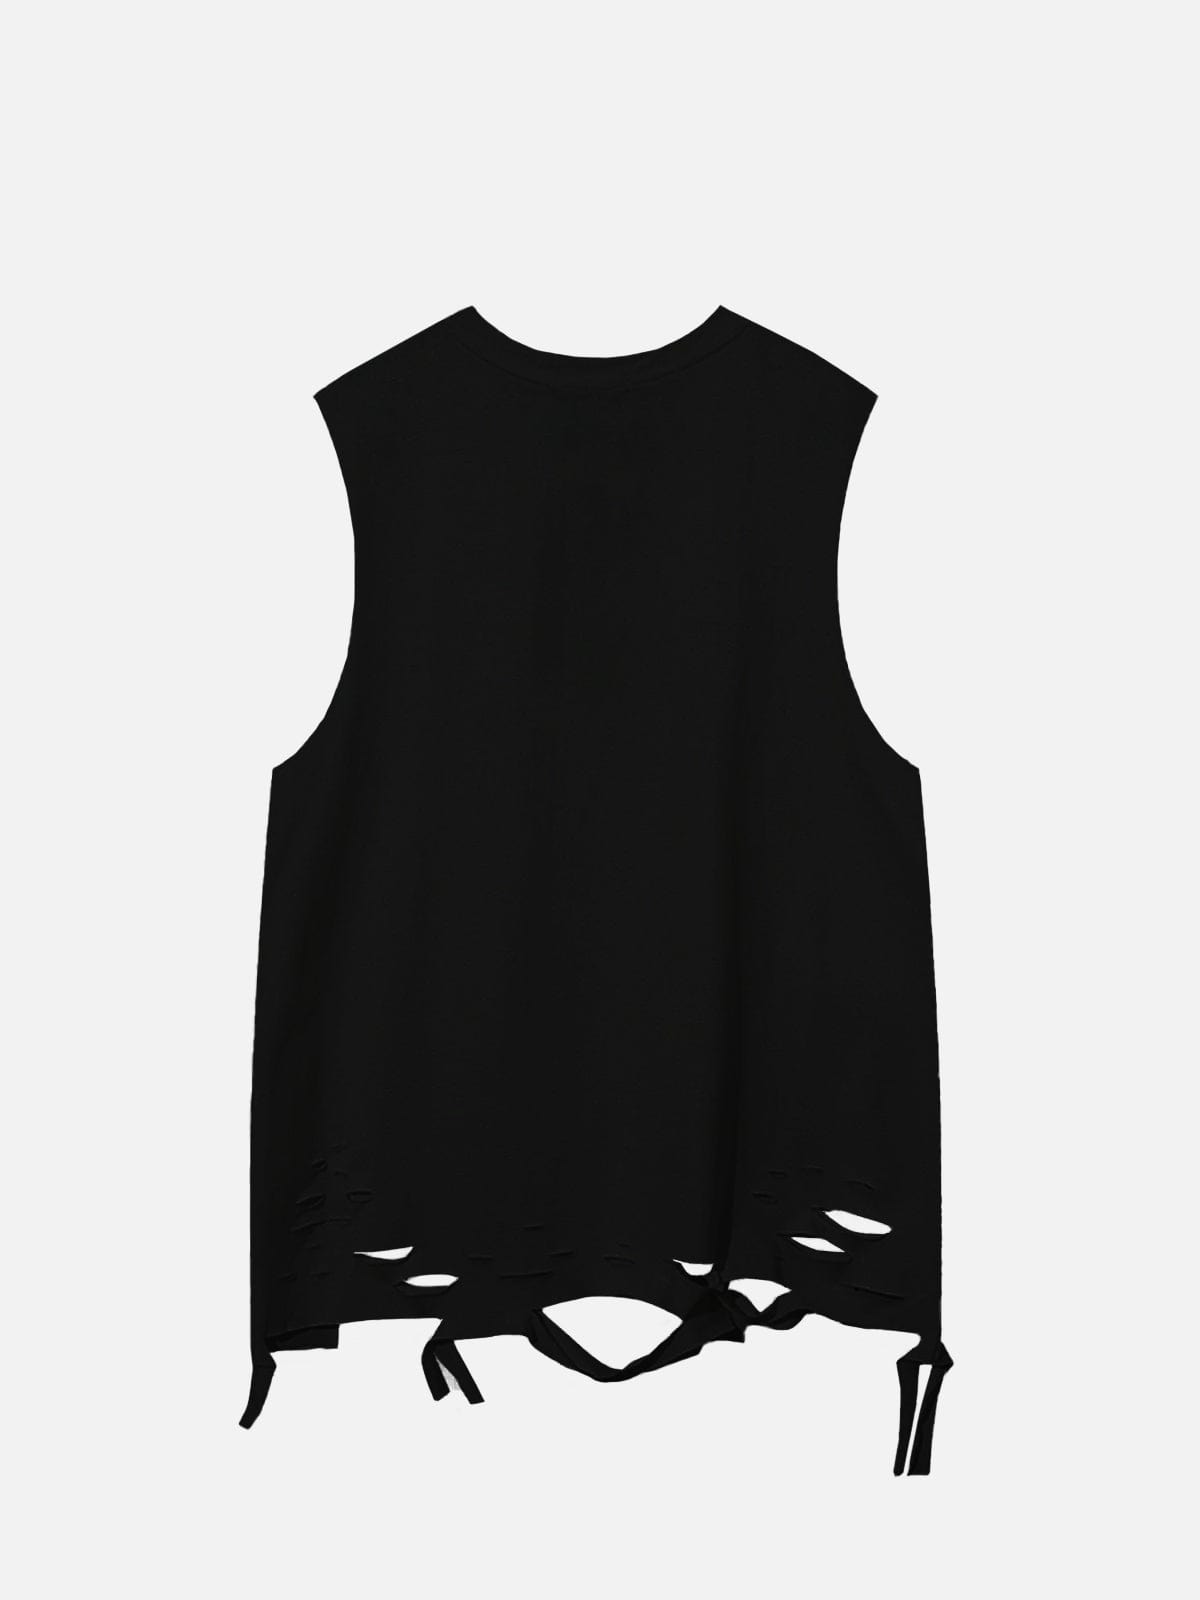 NEV Chain Solid Color Ripped Vest